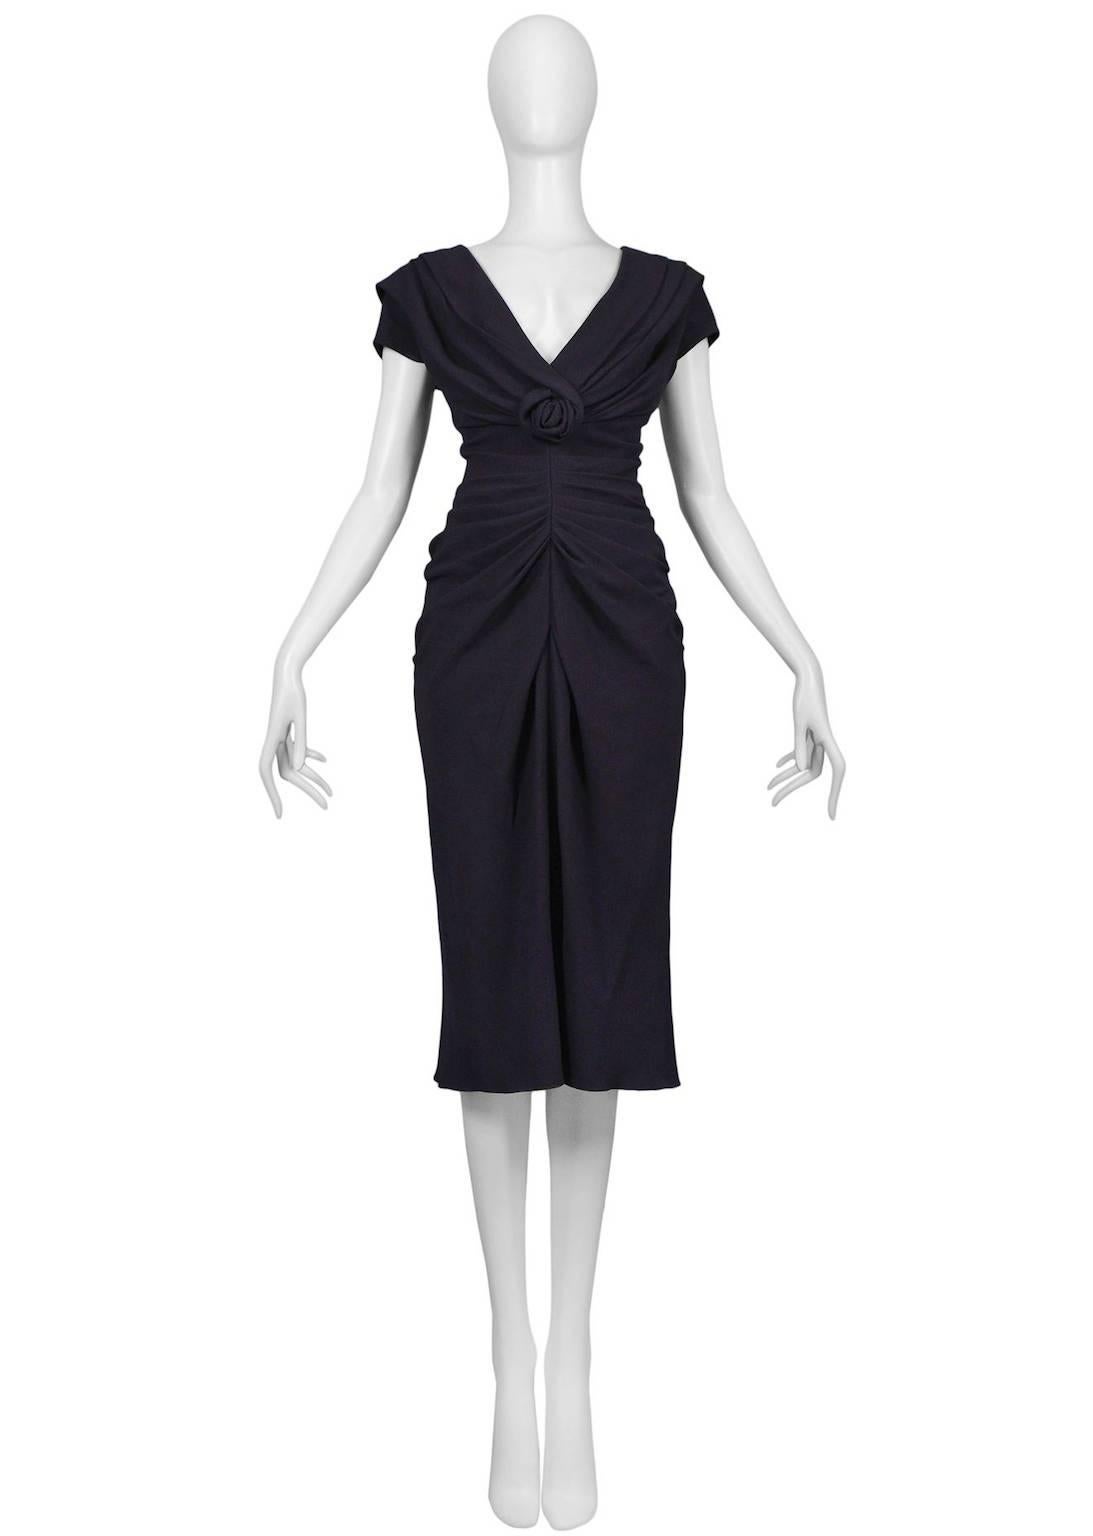 Vintage John Galliano for Christian Dior navy silk crepe dress with flower center detail and side zipper closure.